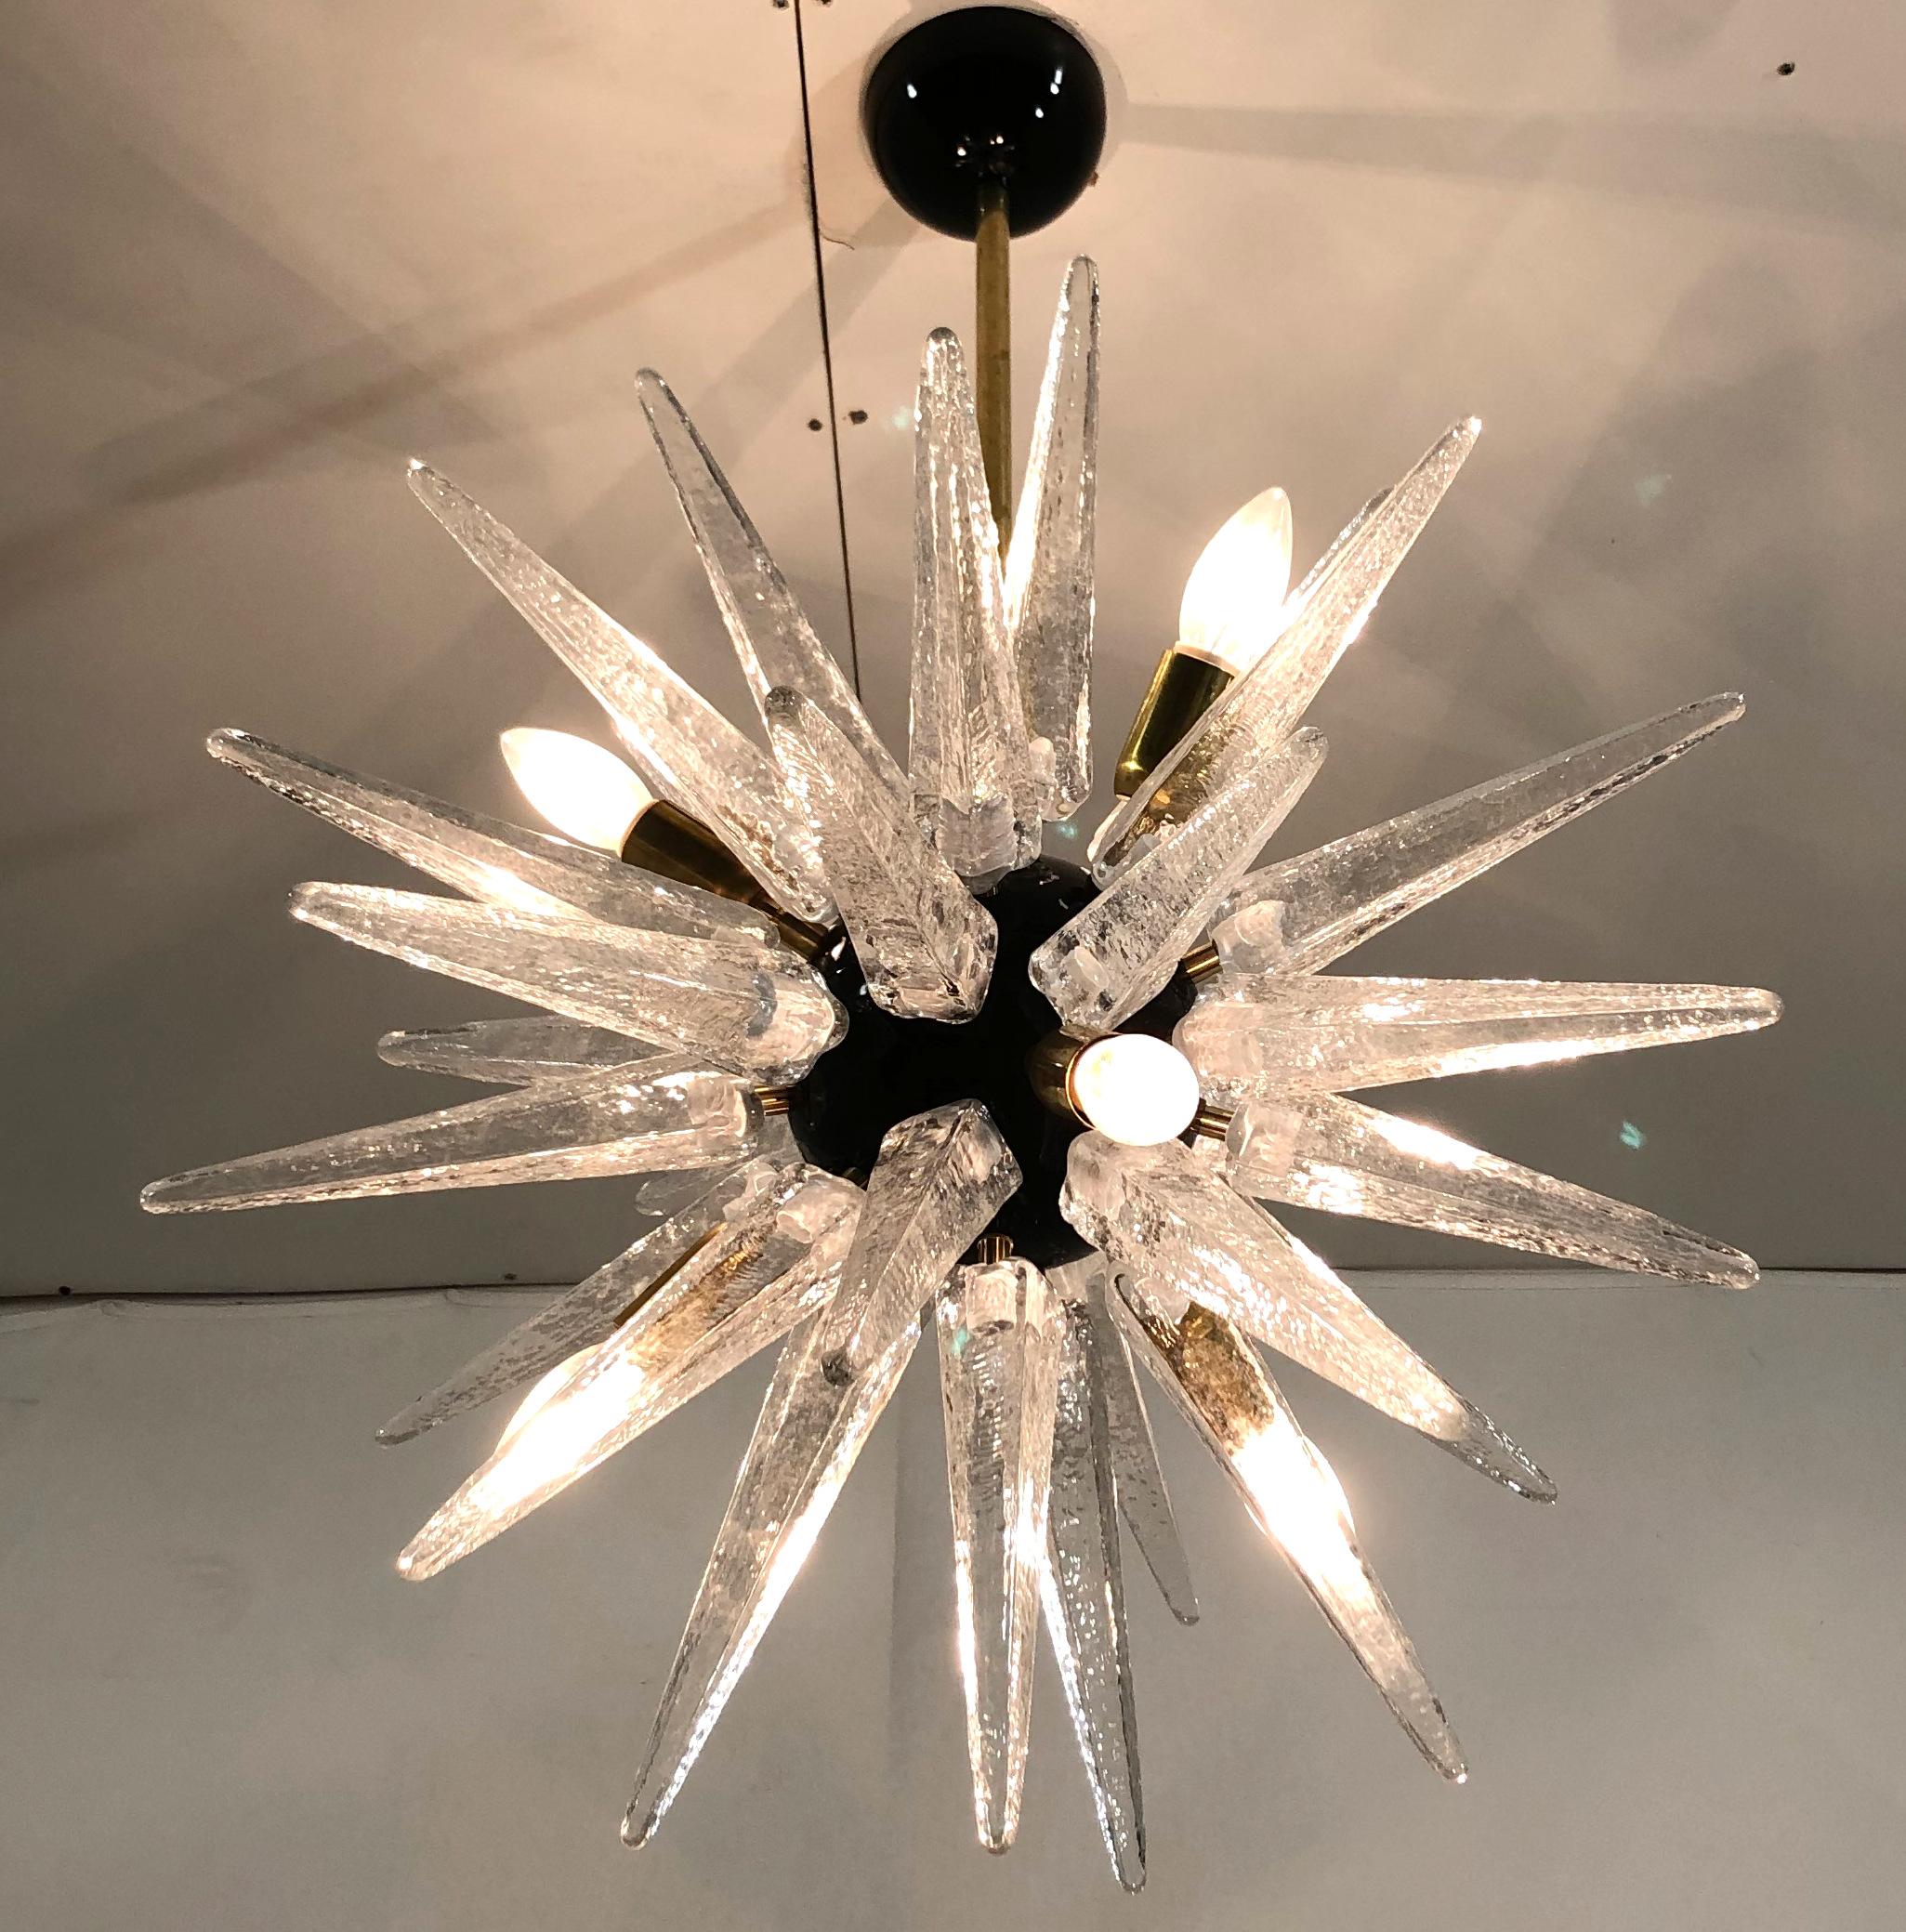 Italian modern Sputnik chandelier with clear Murano glass shards spikes, mounted on natural unlacquered brass frame with glossy black centre and canopy, designed by Fabio Bergomi for Fabio Ltd / Made in Italy
6 lights / E12 or E14 type / max 40W